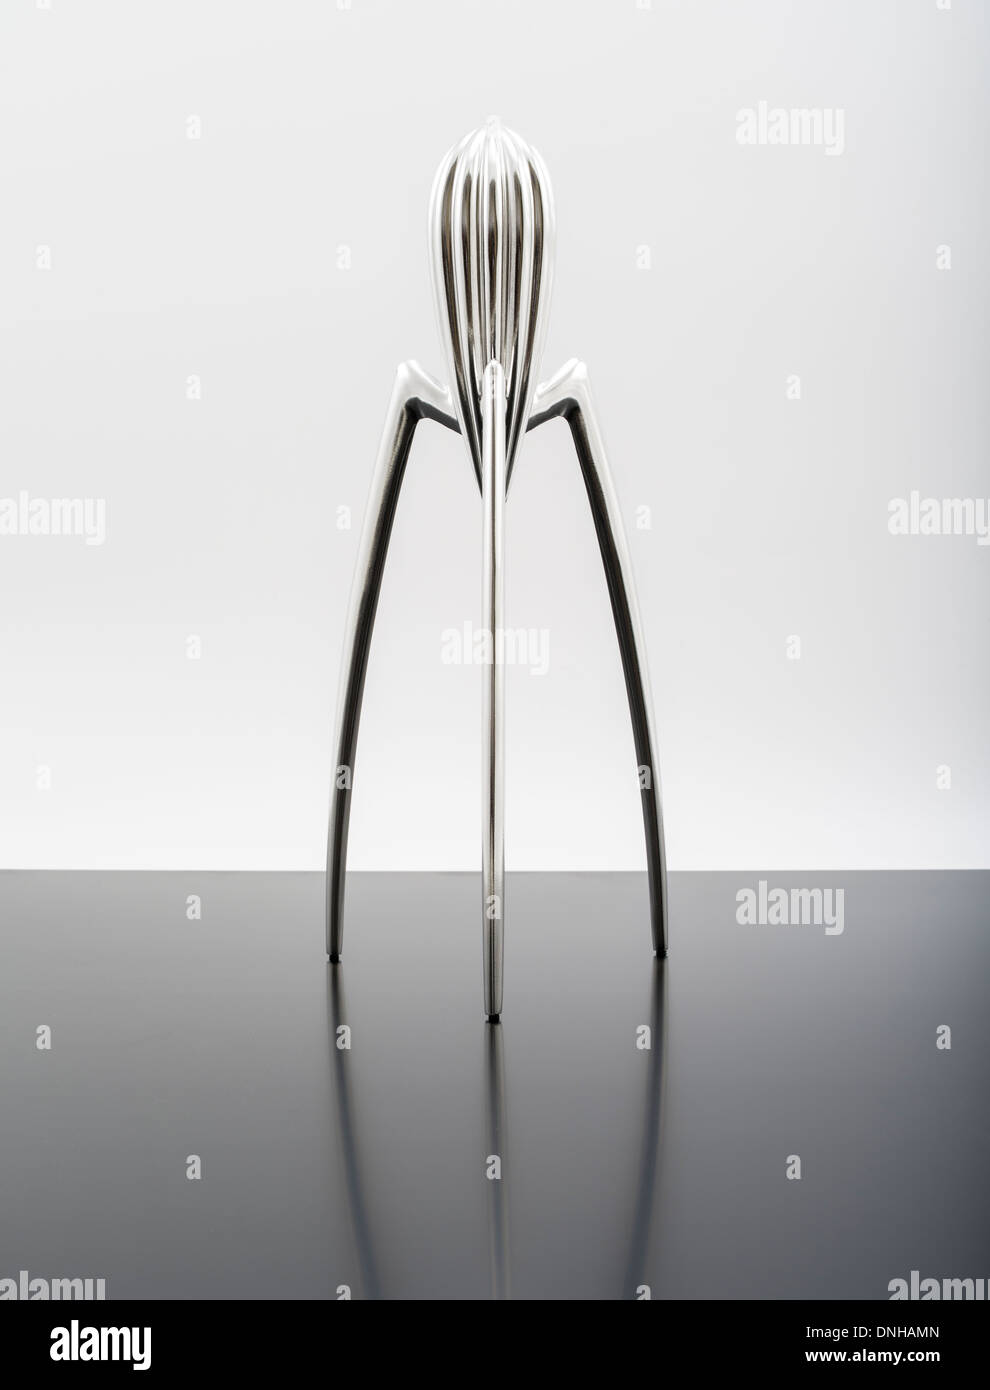 Alessi Juicy Salif Citrus Squeezer Designed by Philippe Starck for Alessi. Iconic designs in kitchen / home equipment appliances Stock Photo